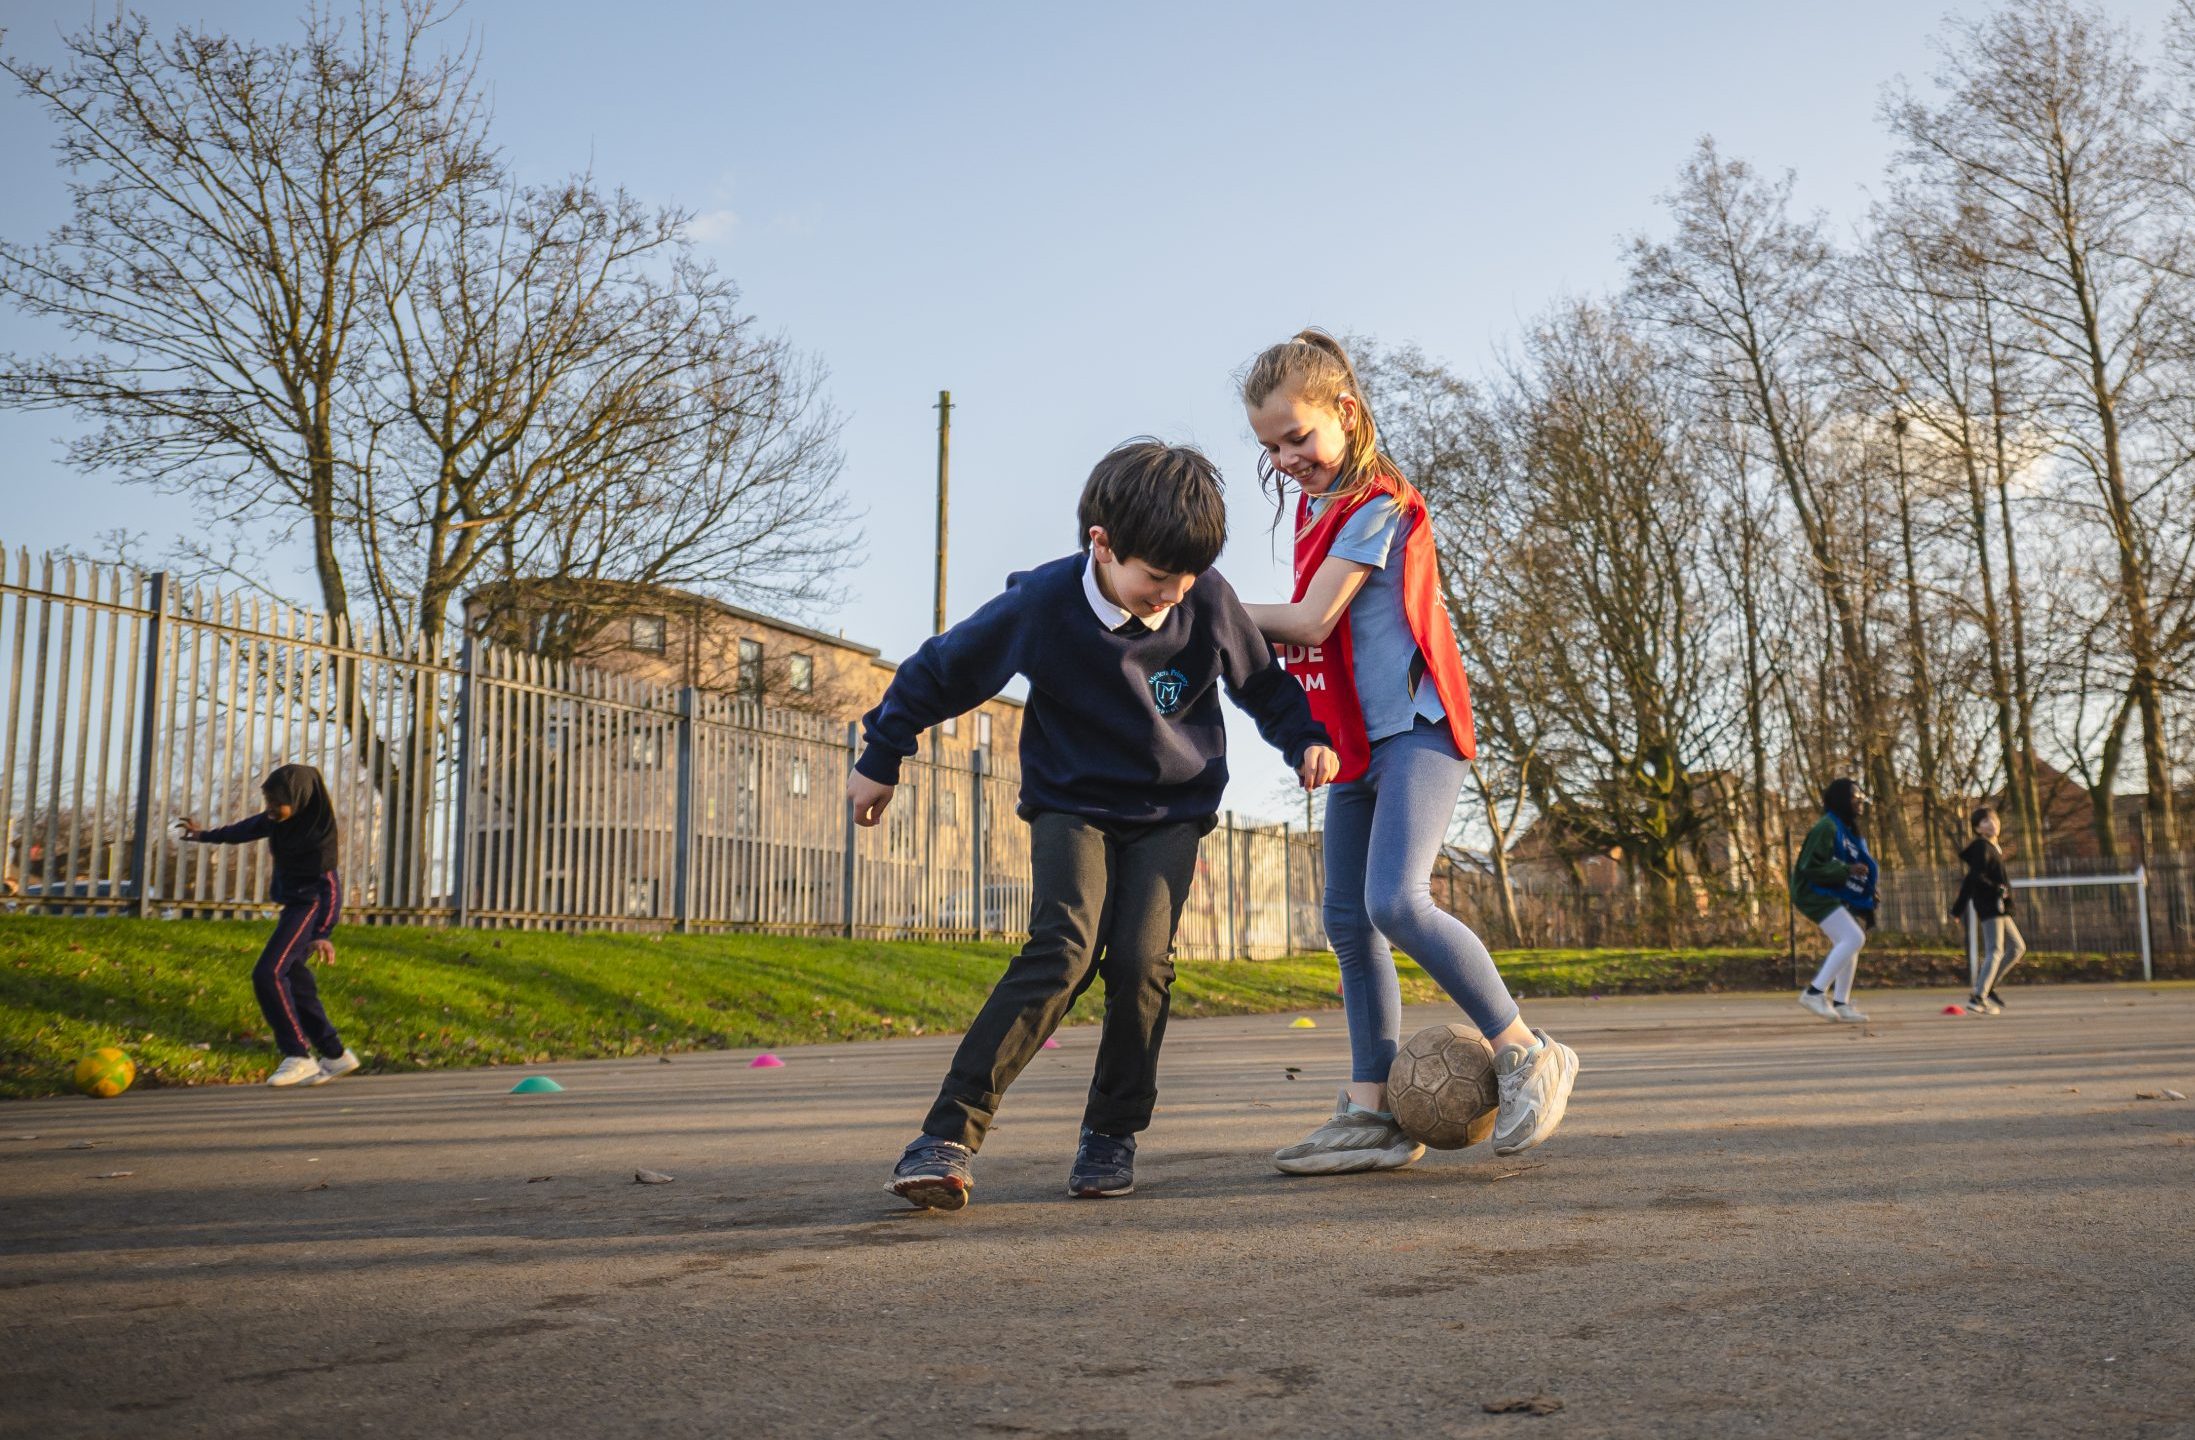 A young boy and girl playing football together at school